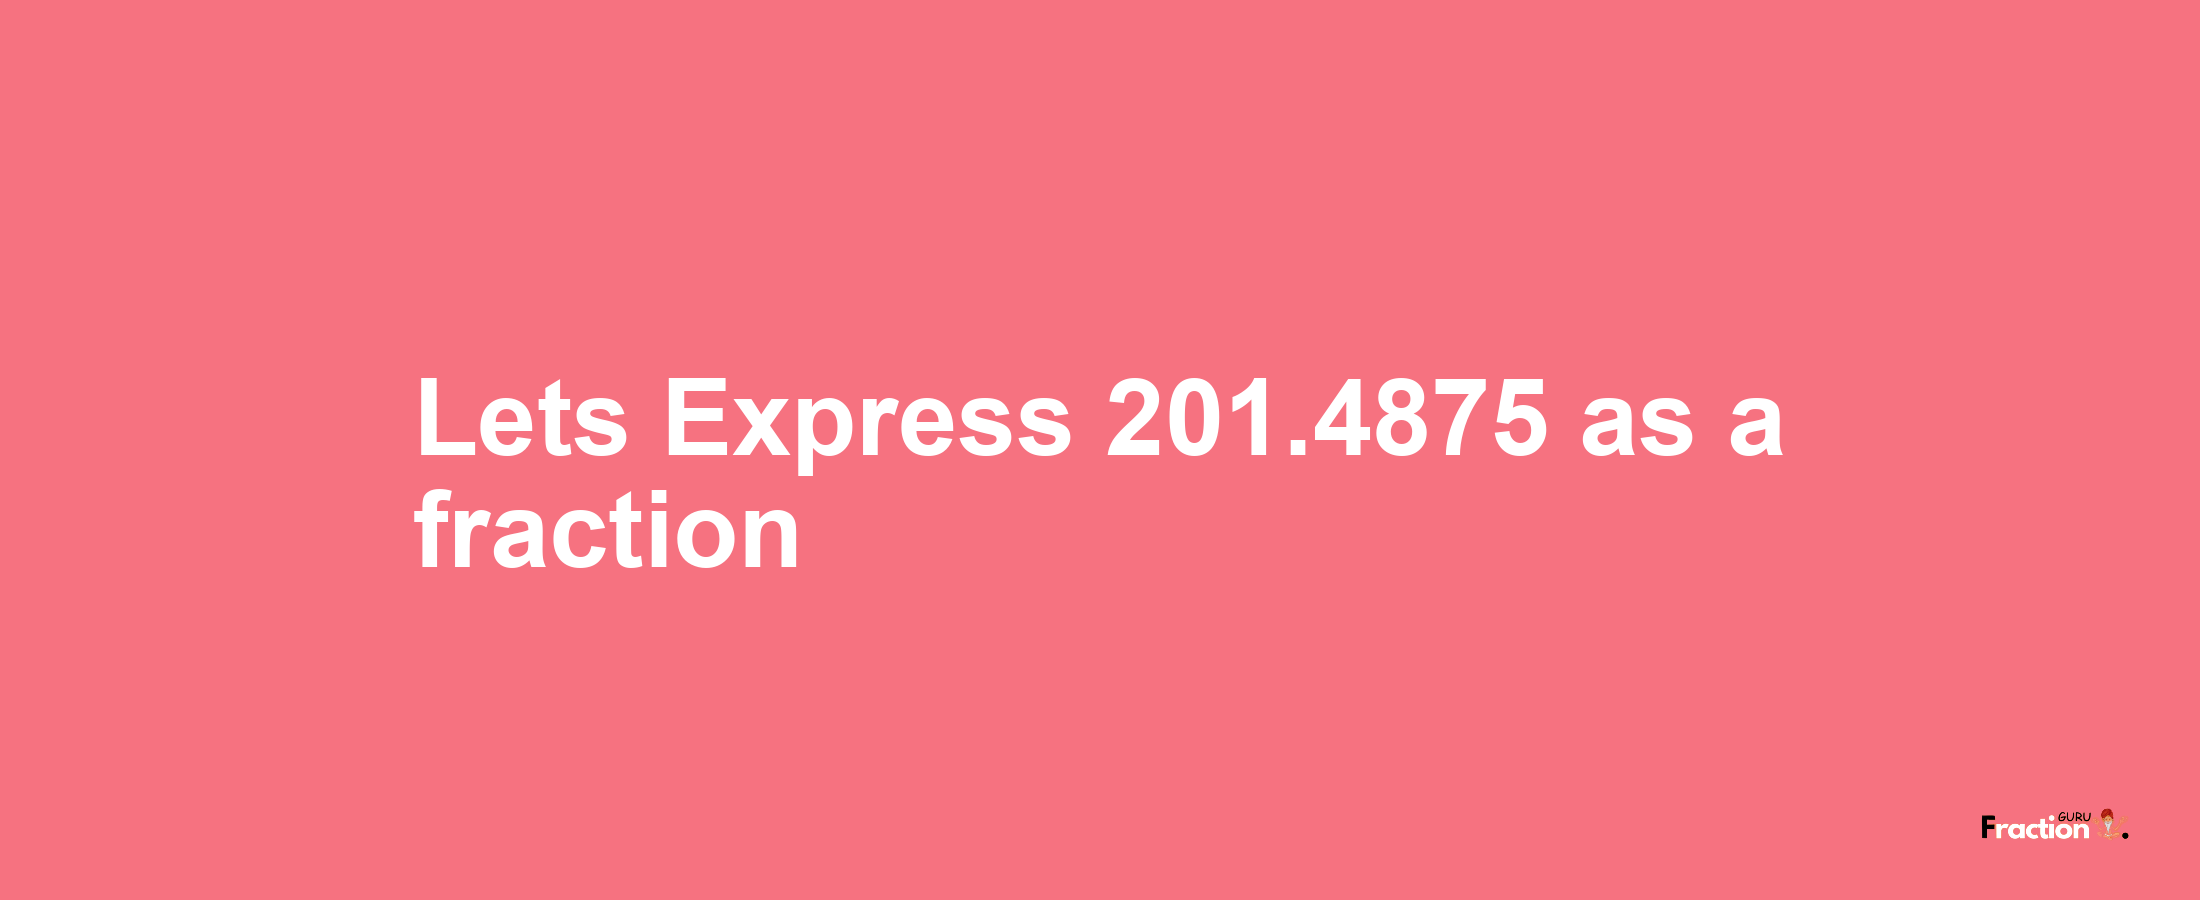 Lets Express 201.4875 as afraction